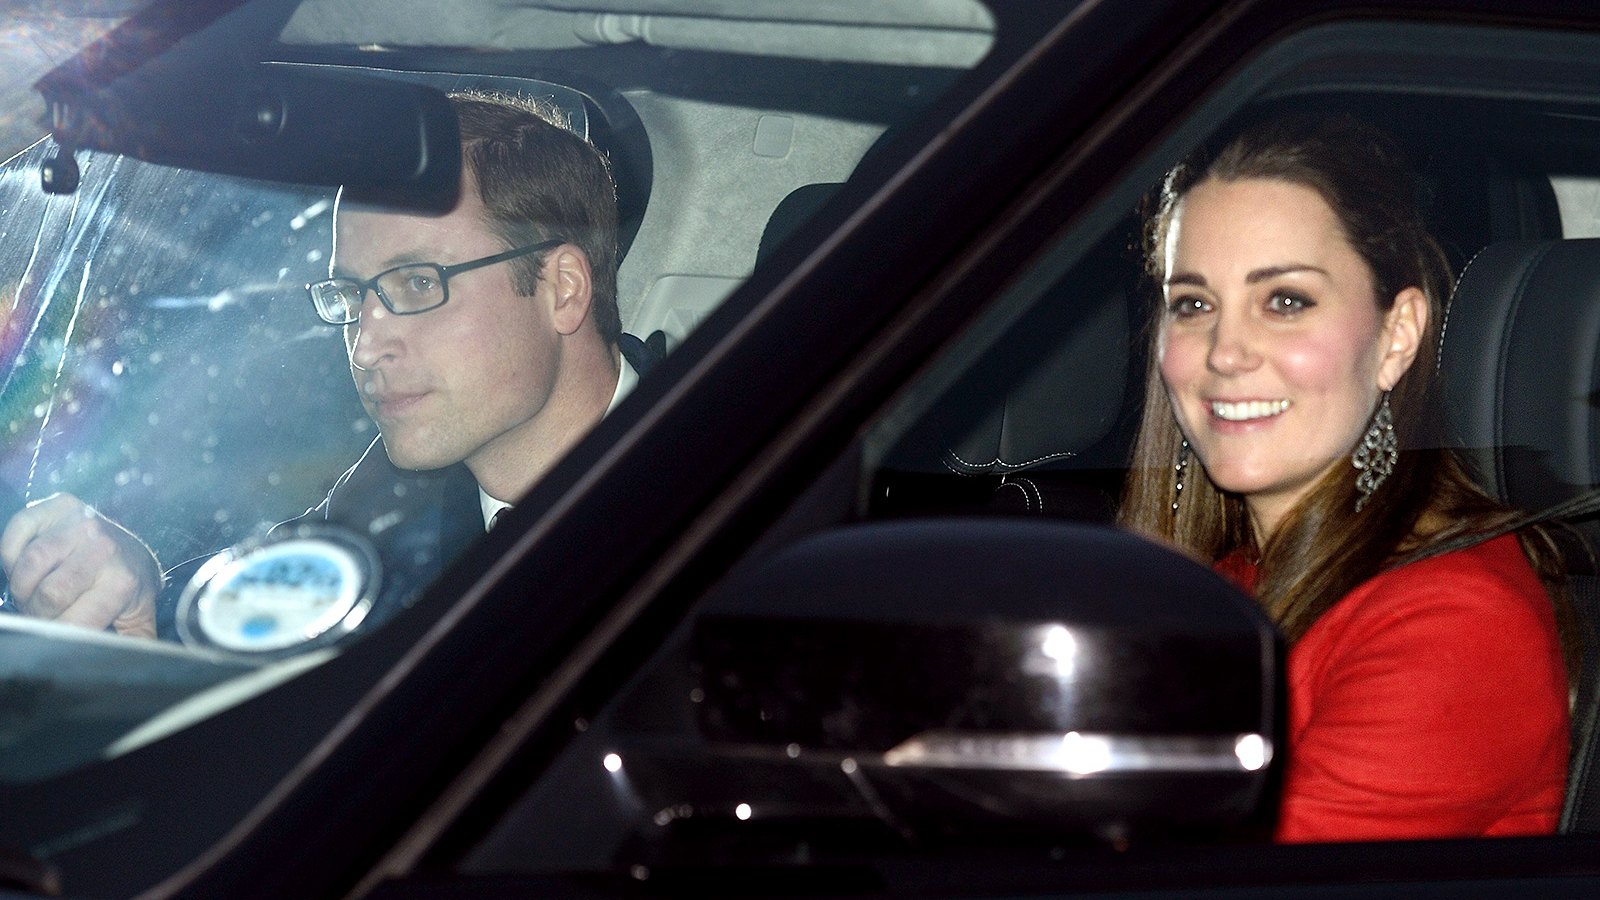 Prince William and Kate Middleton leave Buckingham Palace on Dec. 17